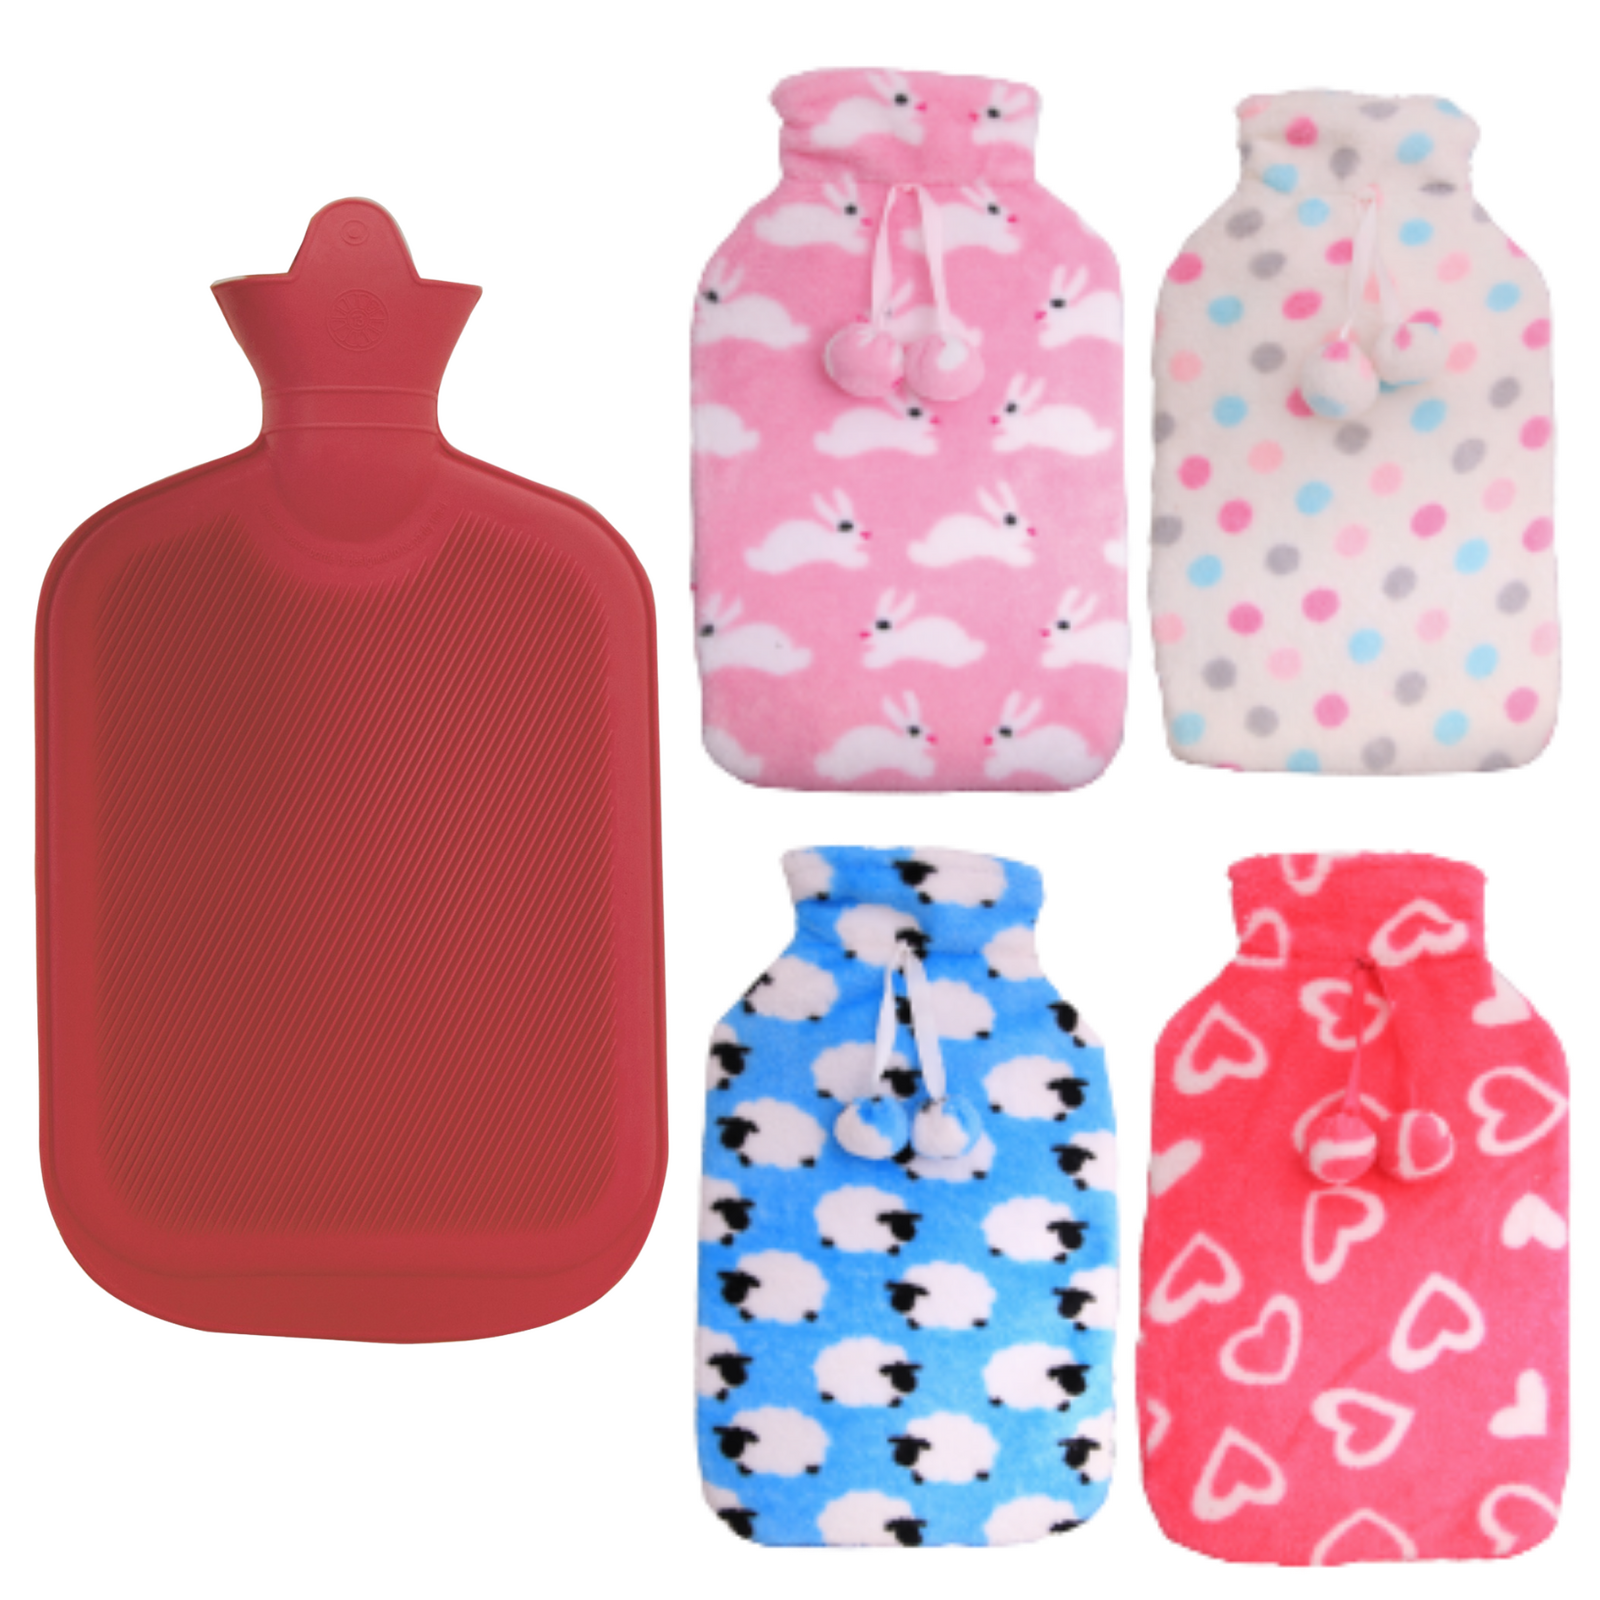 2L HOT WATER BOTTLE with Coral Fleece Cover Winter Warm Natural Rubber Bag